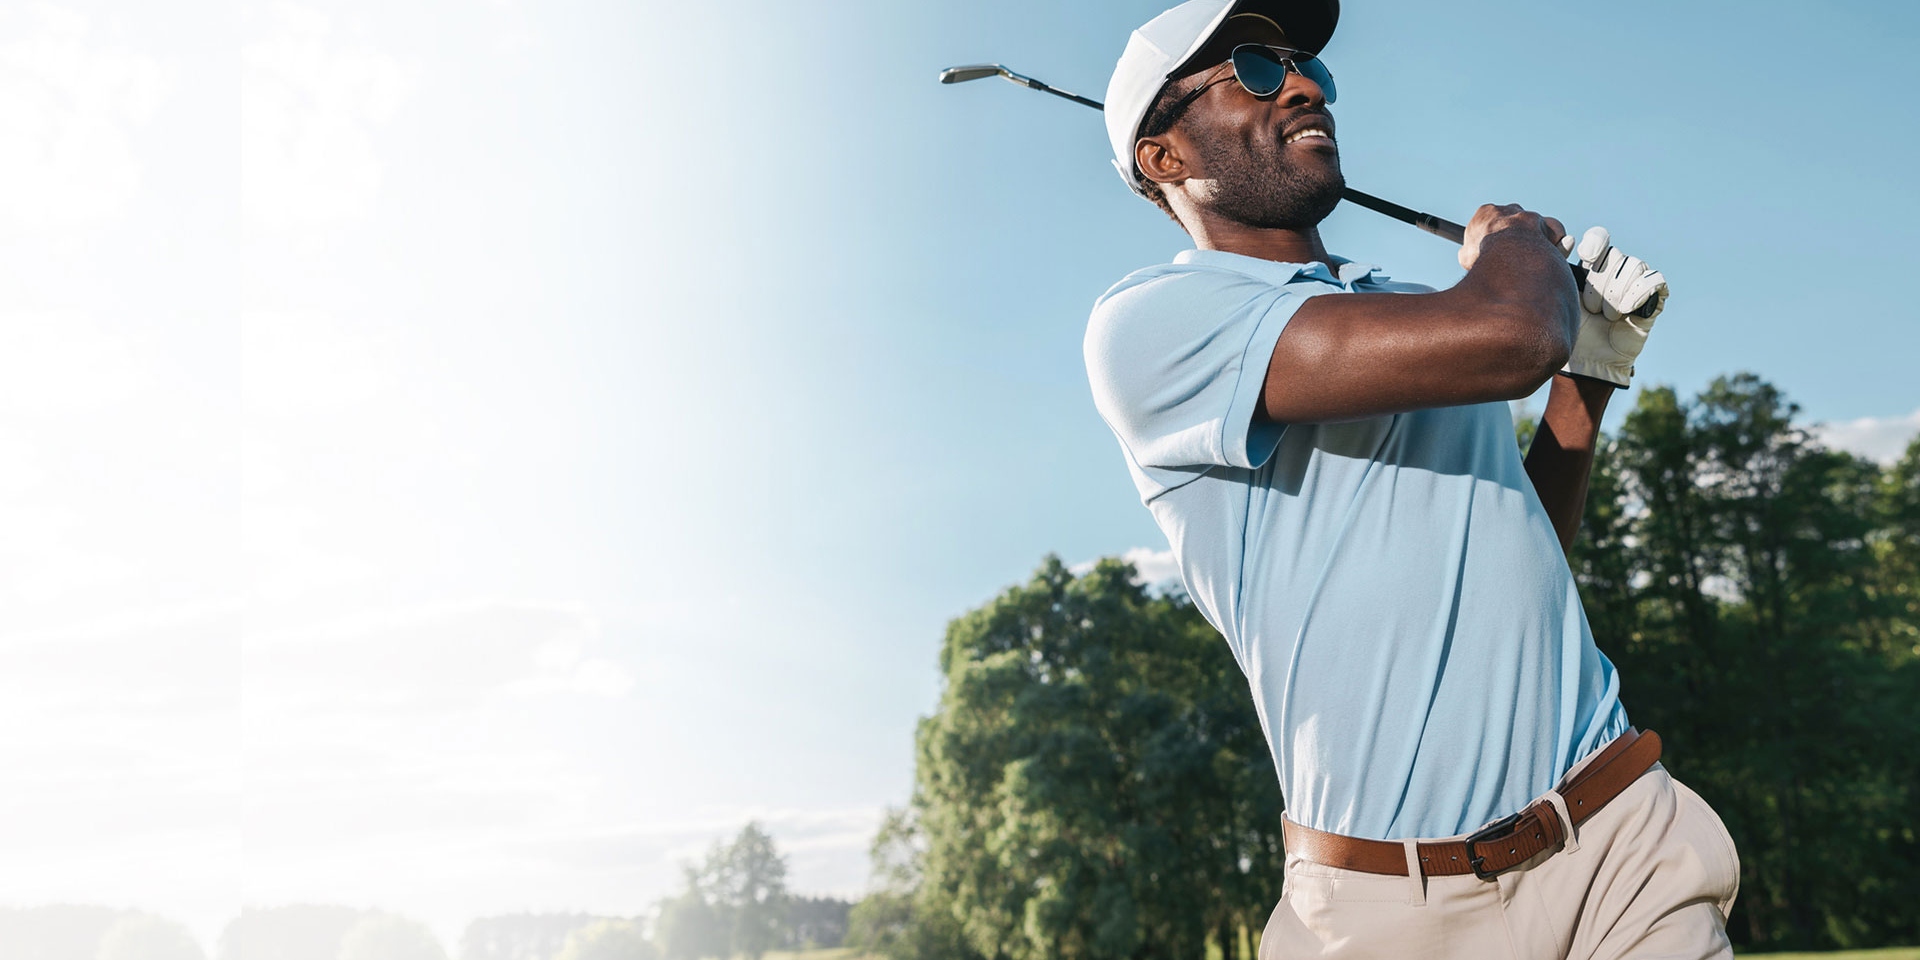 Smiling african american man in cap and sunglasses playing golf